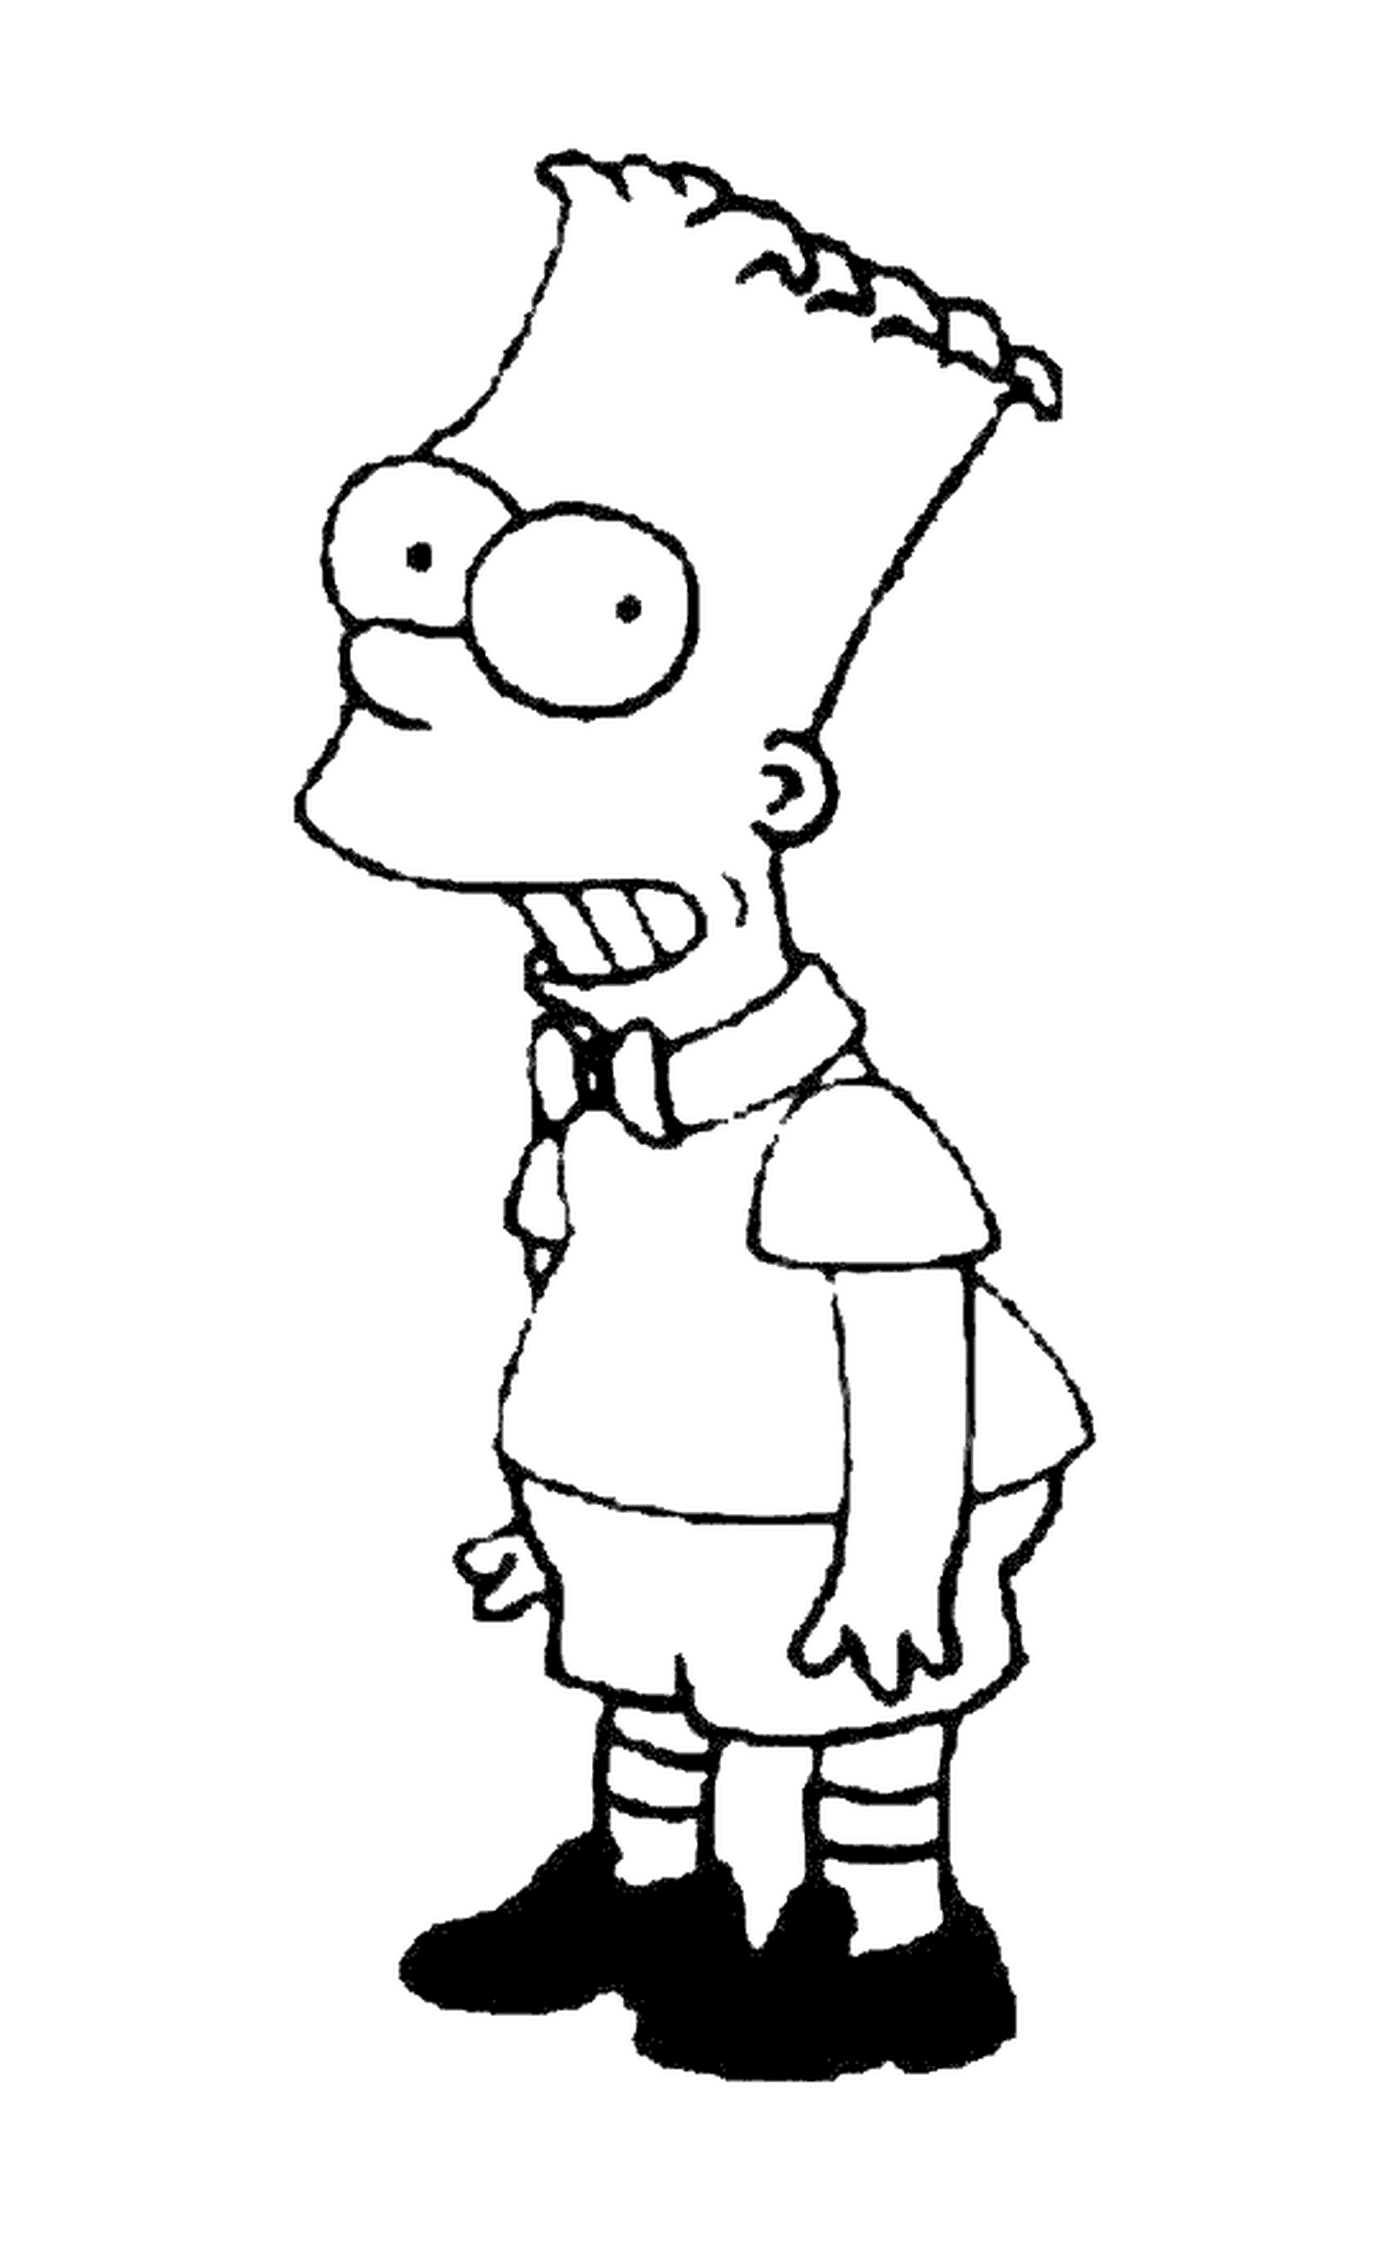  Bart as a model child, character of the Simpsons 